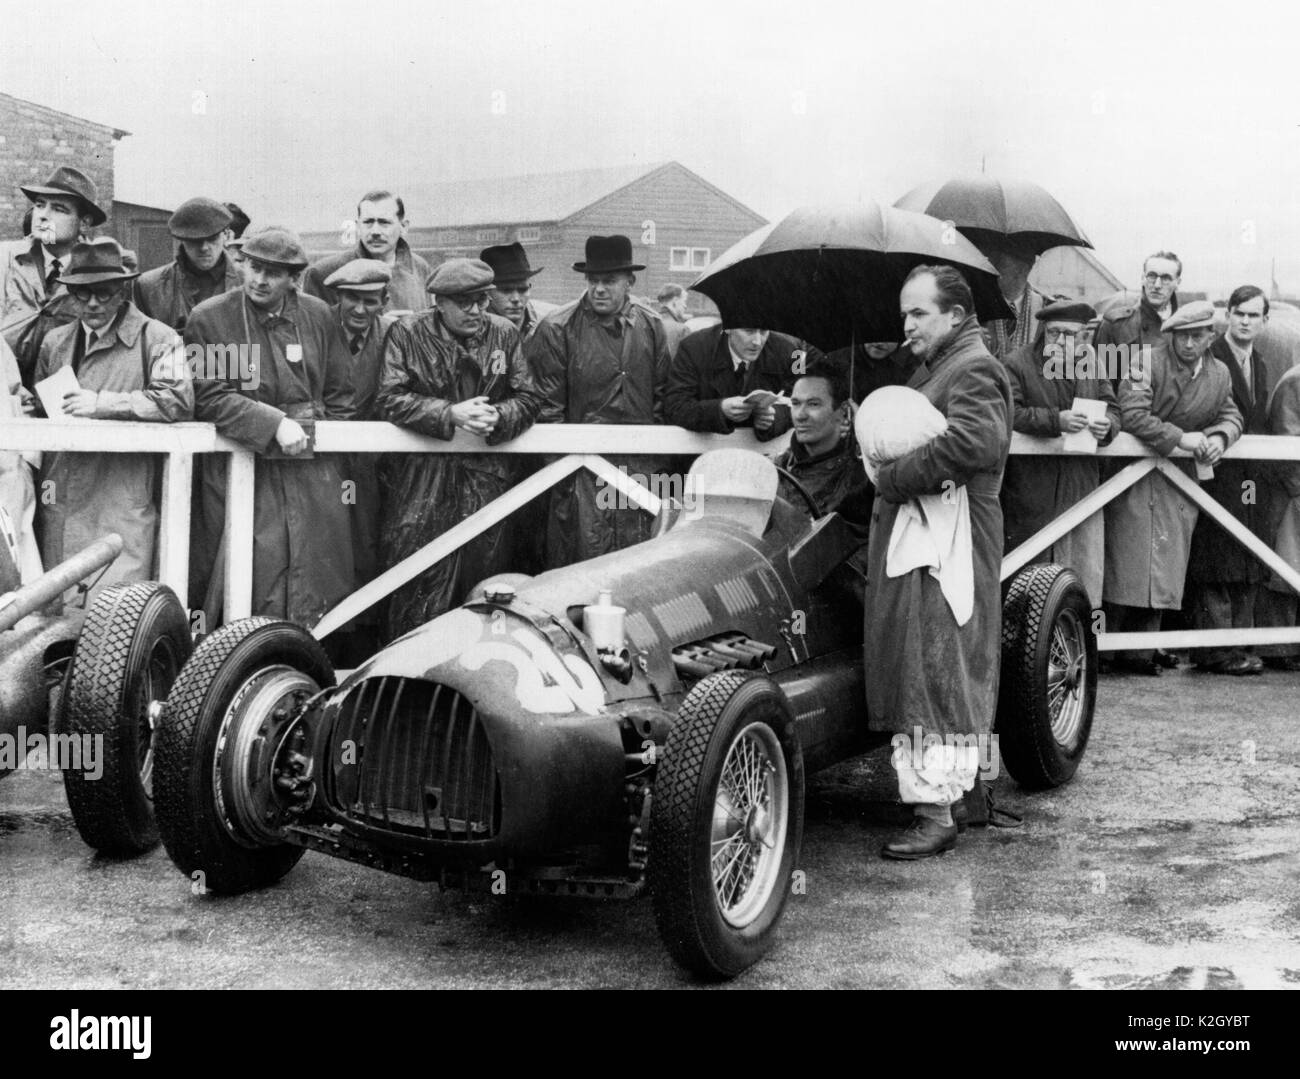 R.R.A Supercharged Special, G.N. Richardson at Aintree 1954 Stock Photo